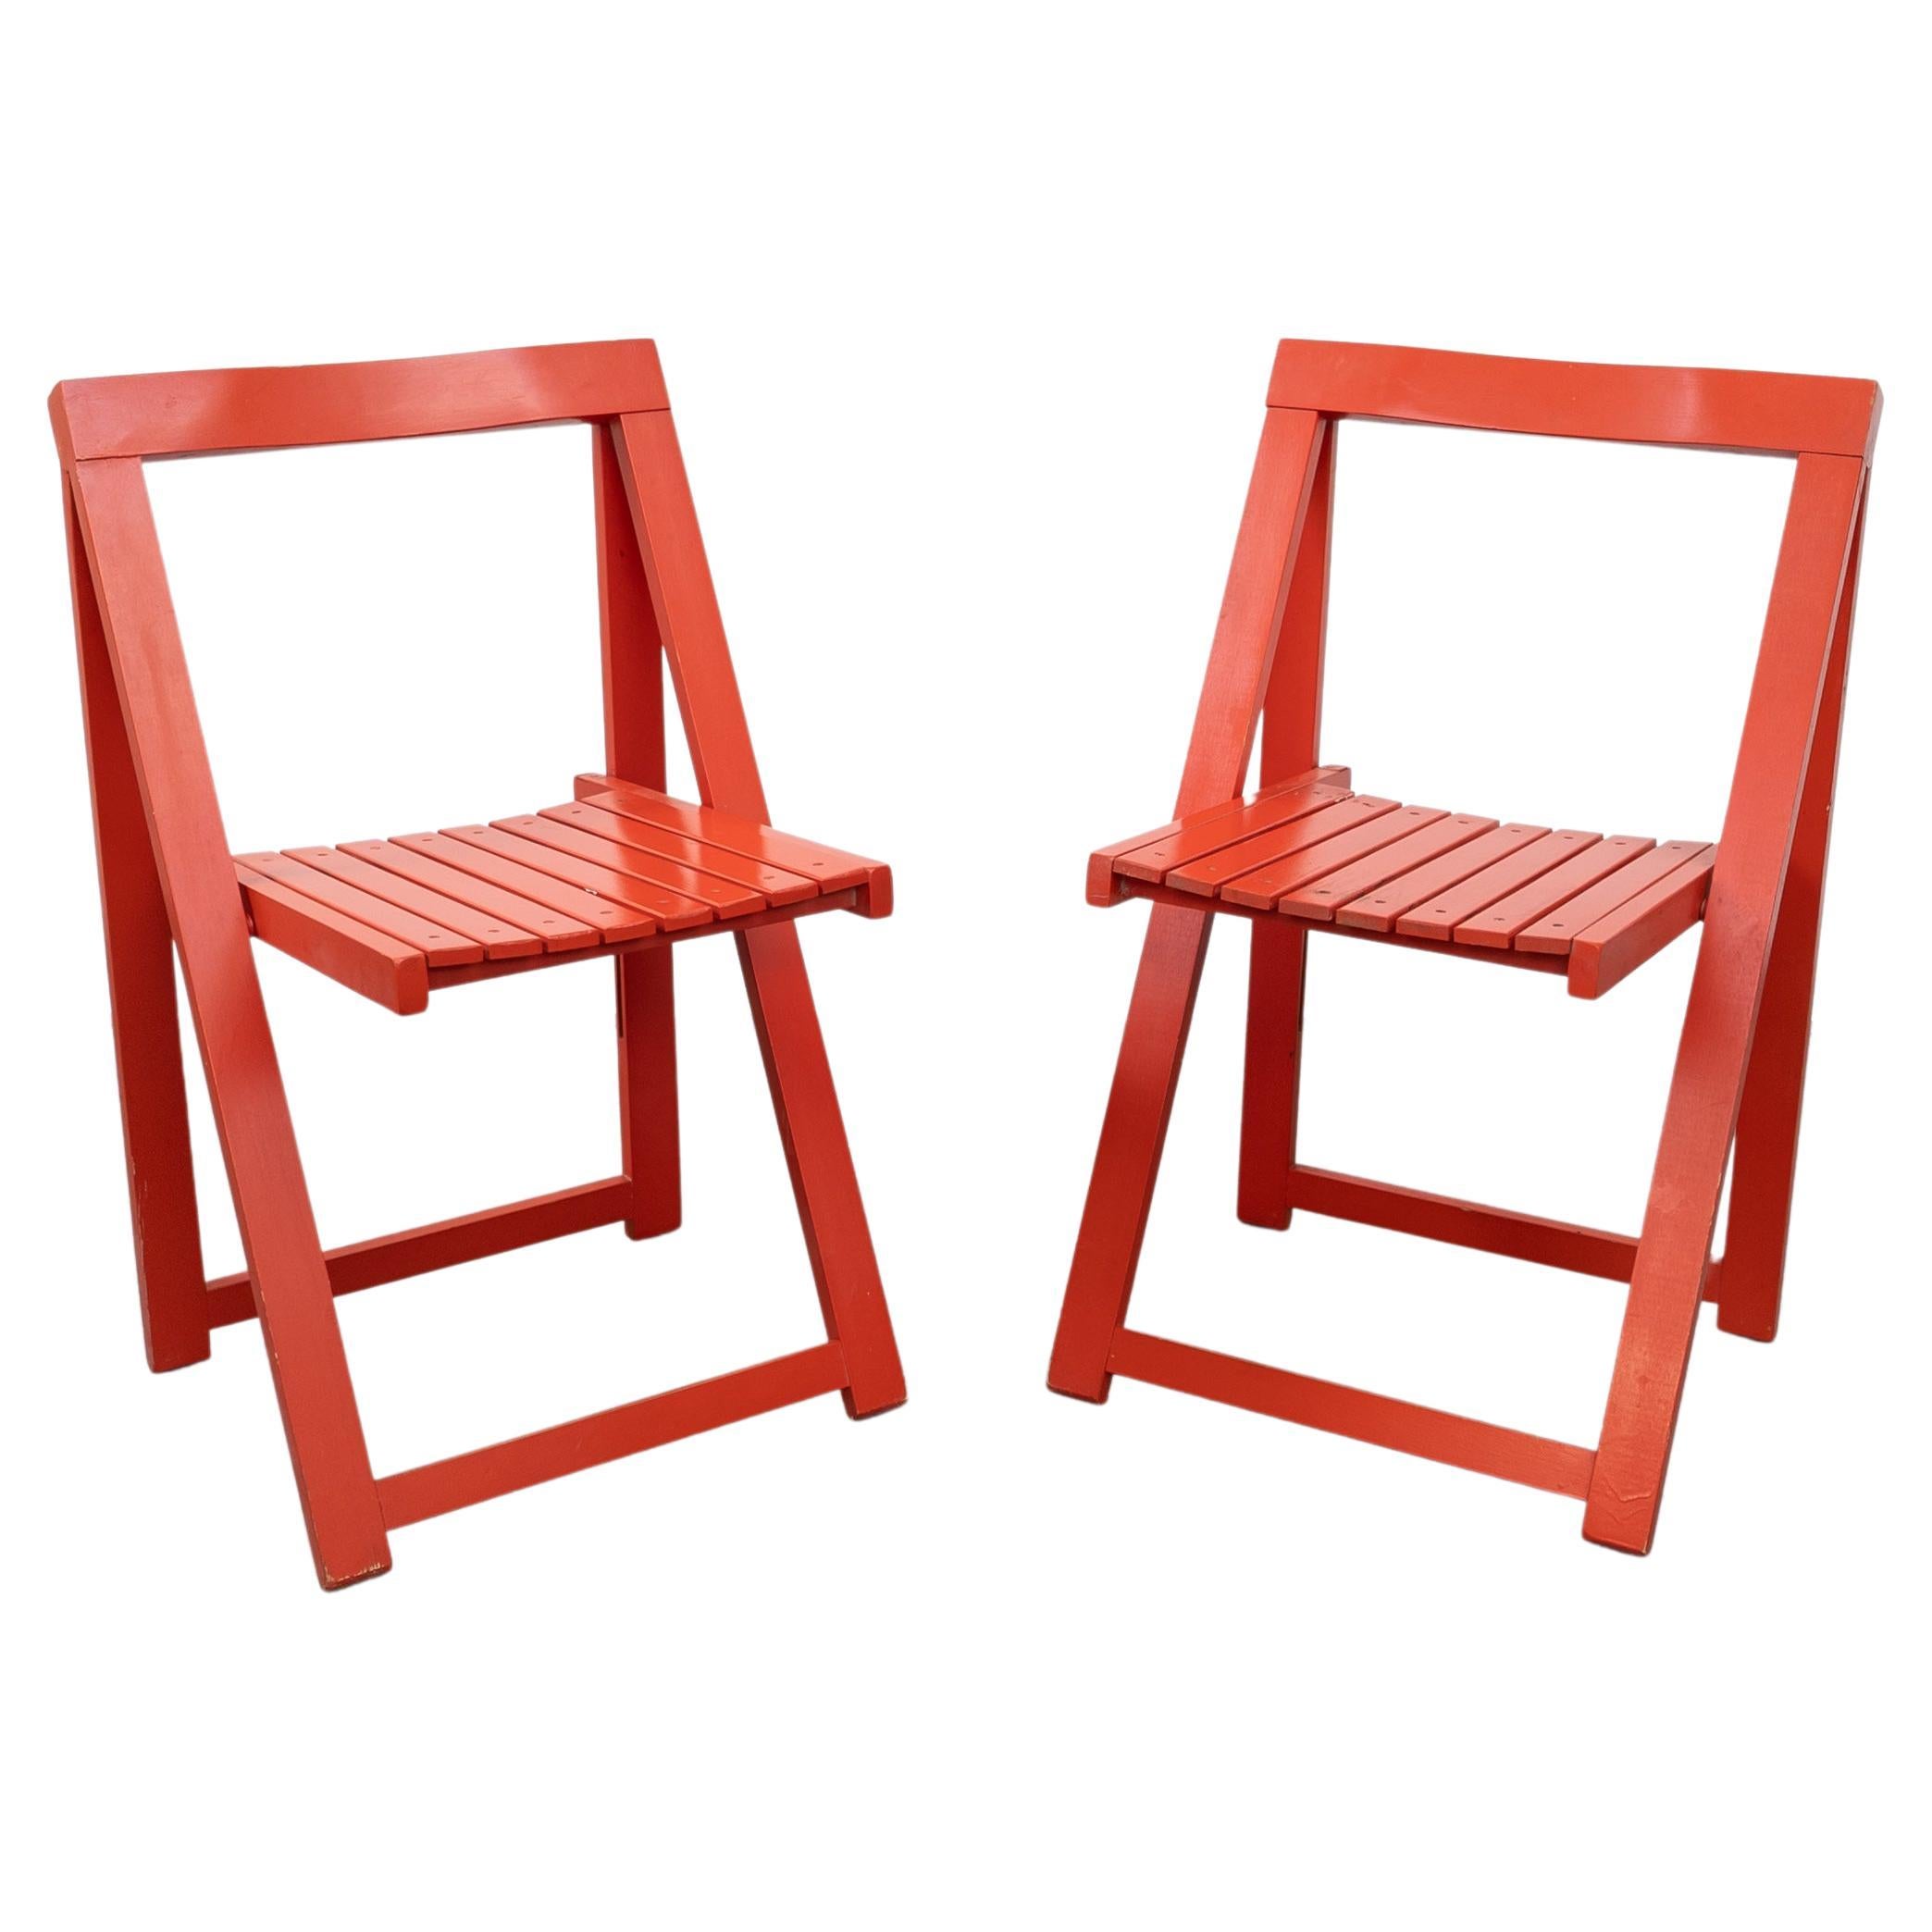 Pair of Vintage Folding Chairs by Aldo Jacober for Alberto Bazzani